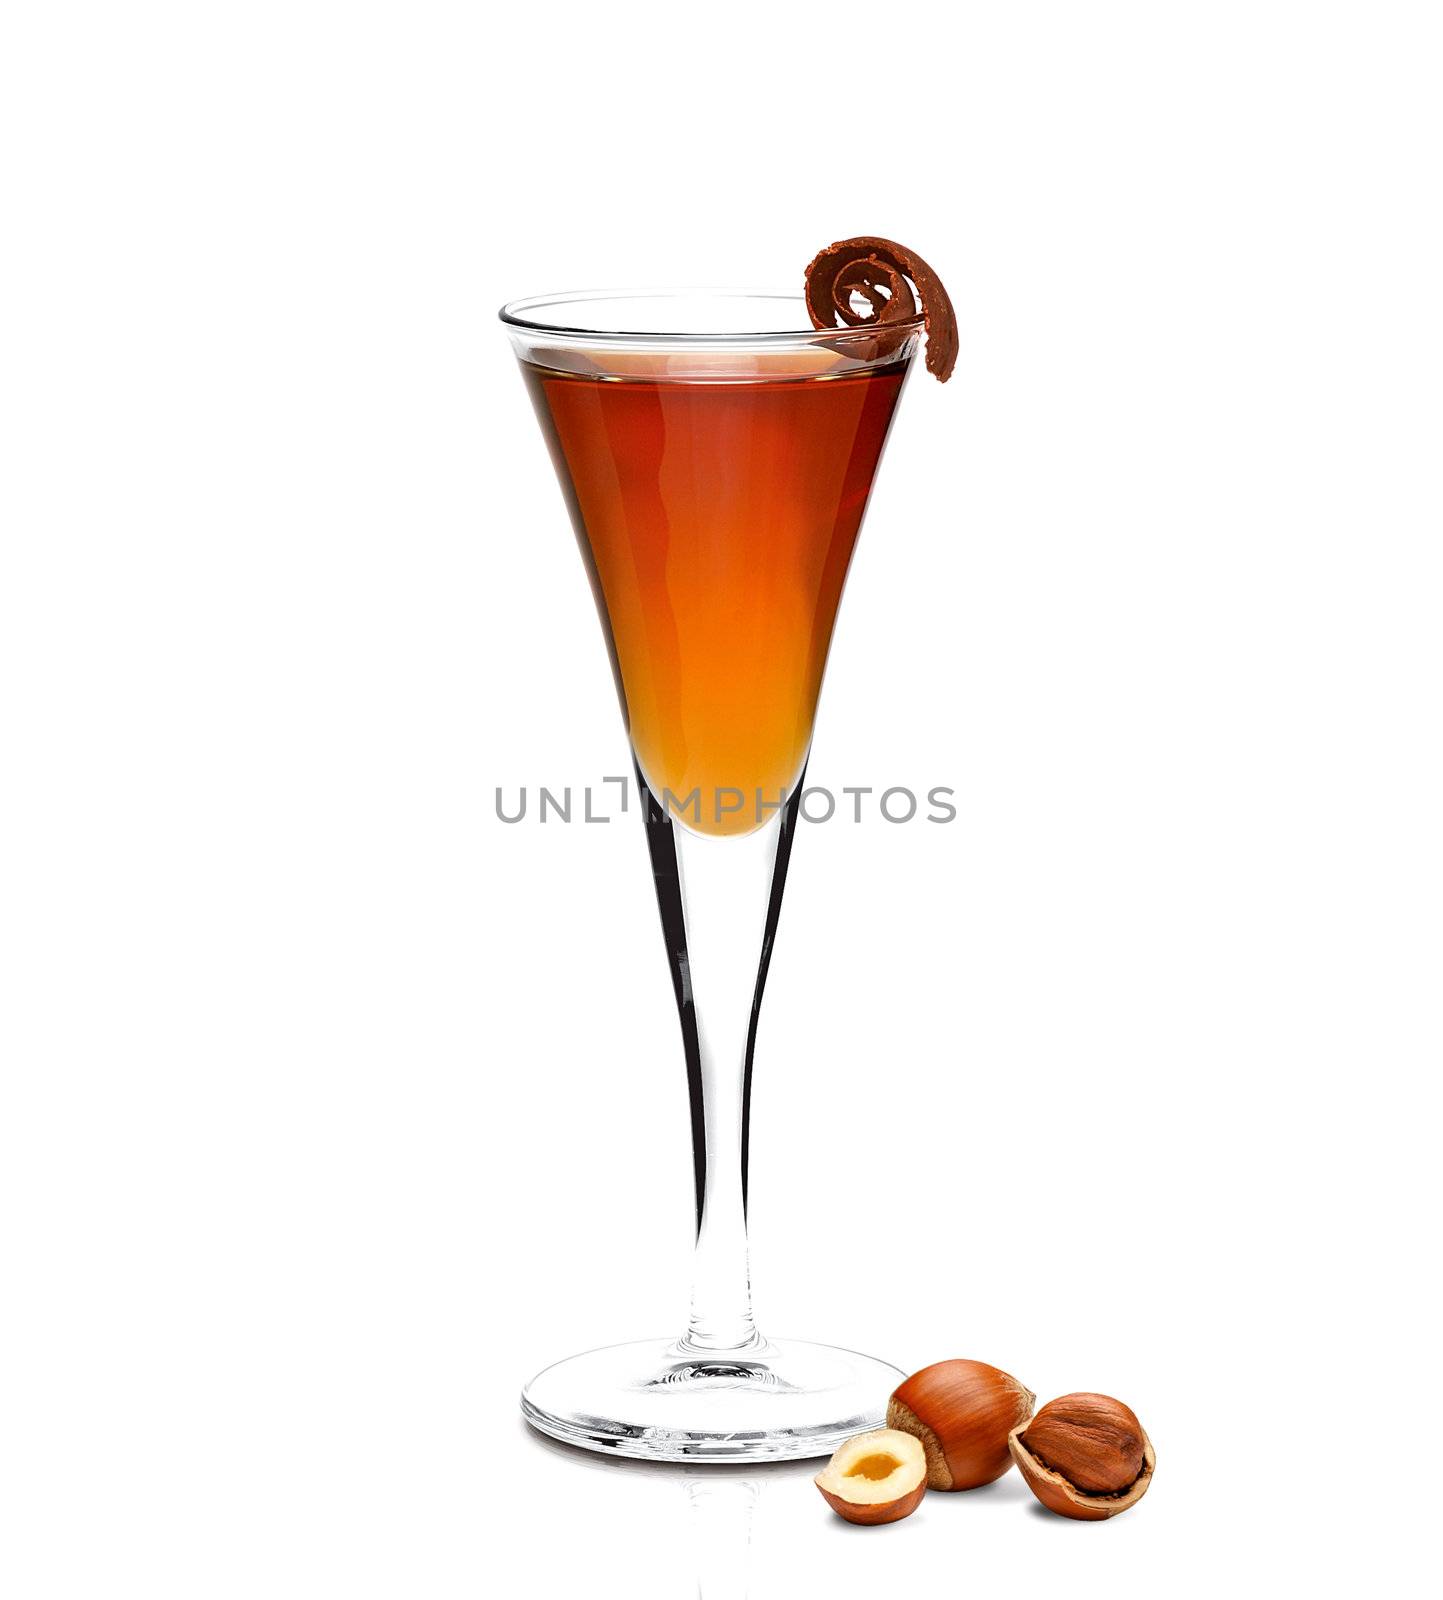 Truffle Cocktail drink on a tall glass and hazelnuts on white background